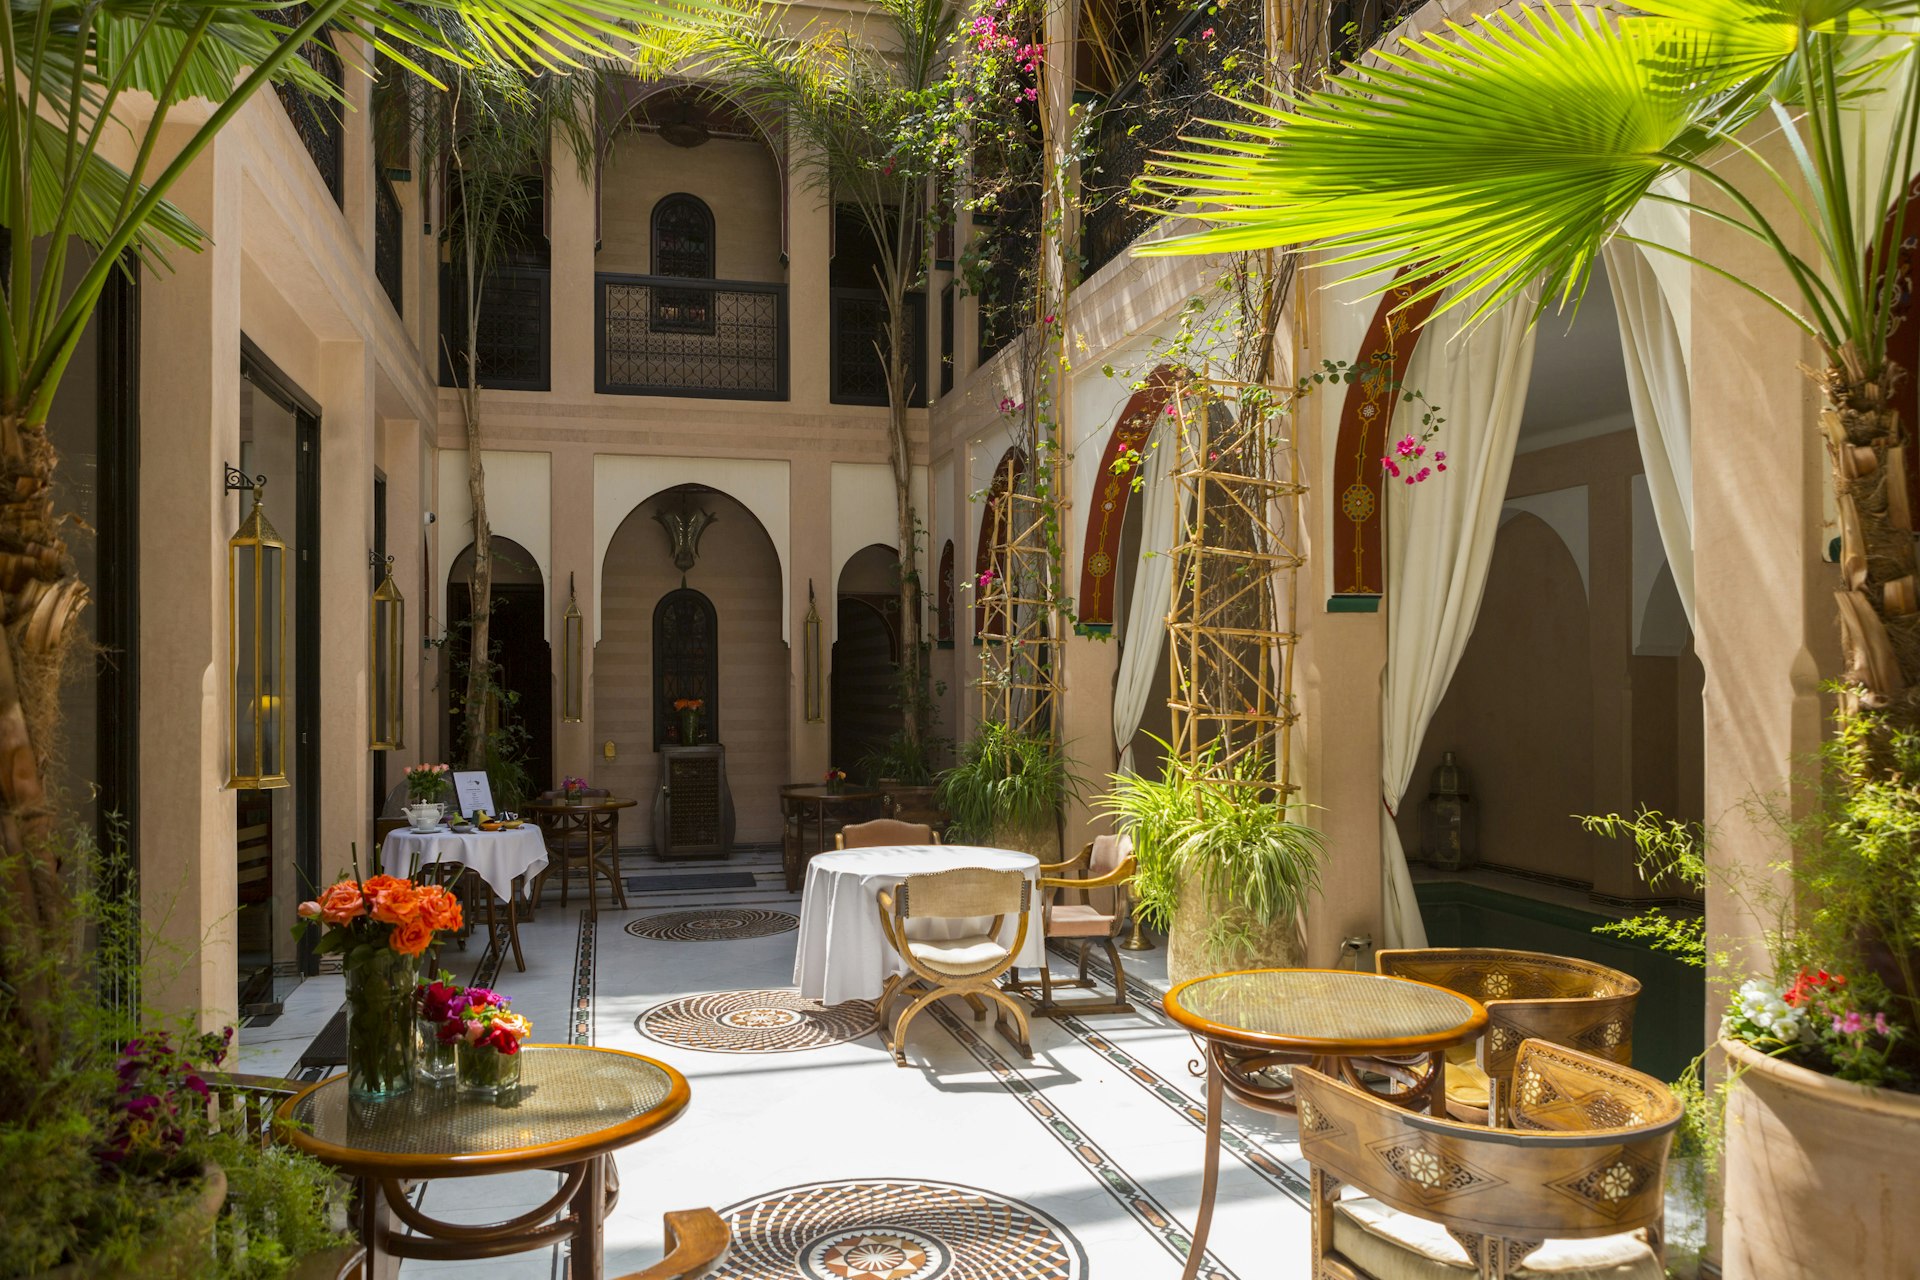 The communal area in a riad courtyard with chairs, tables and plants